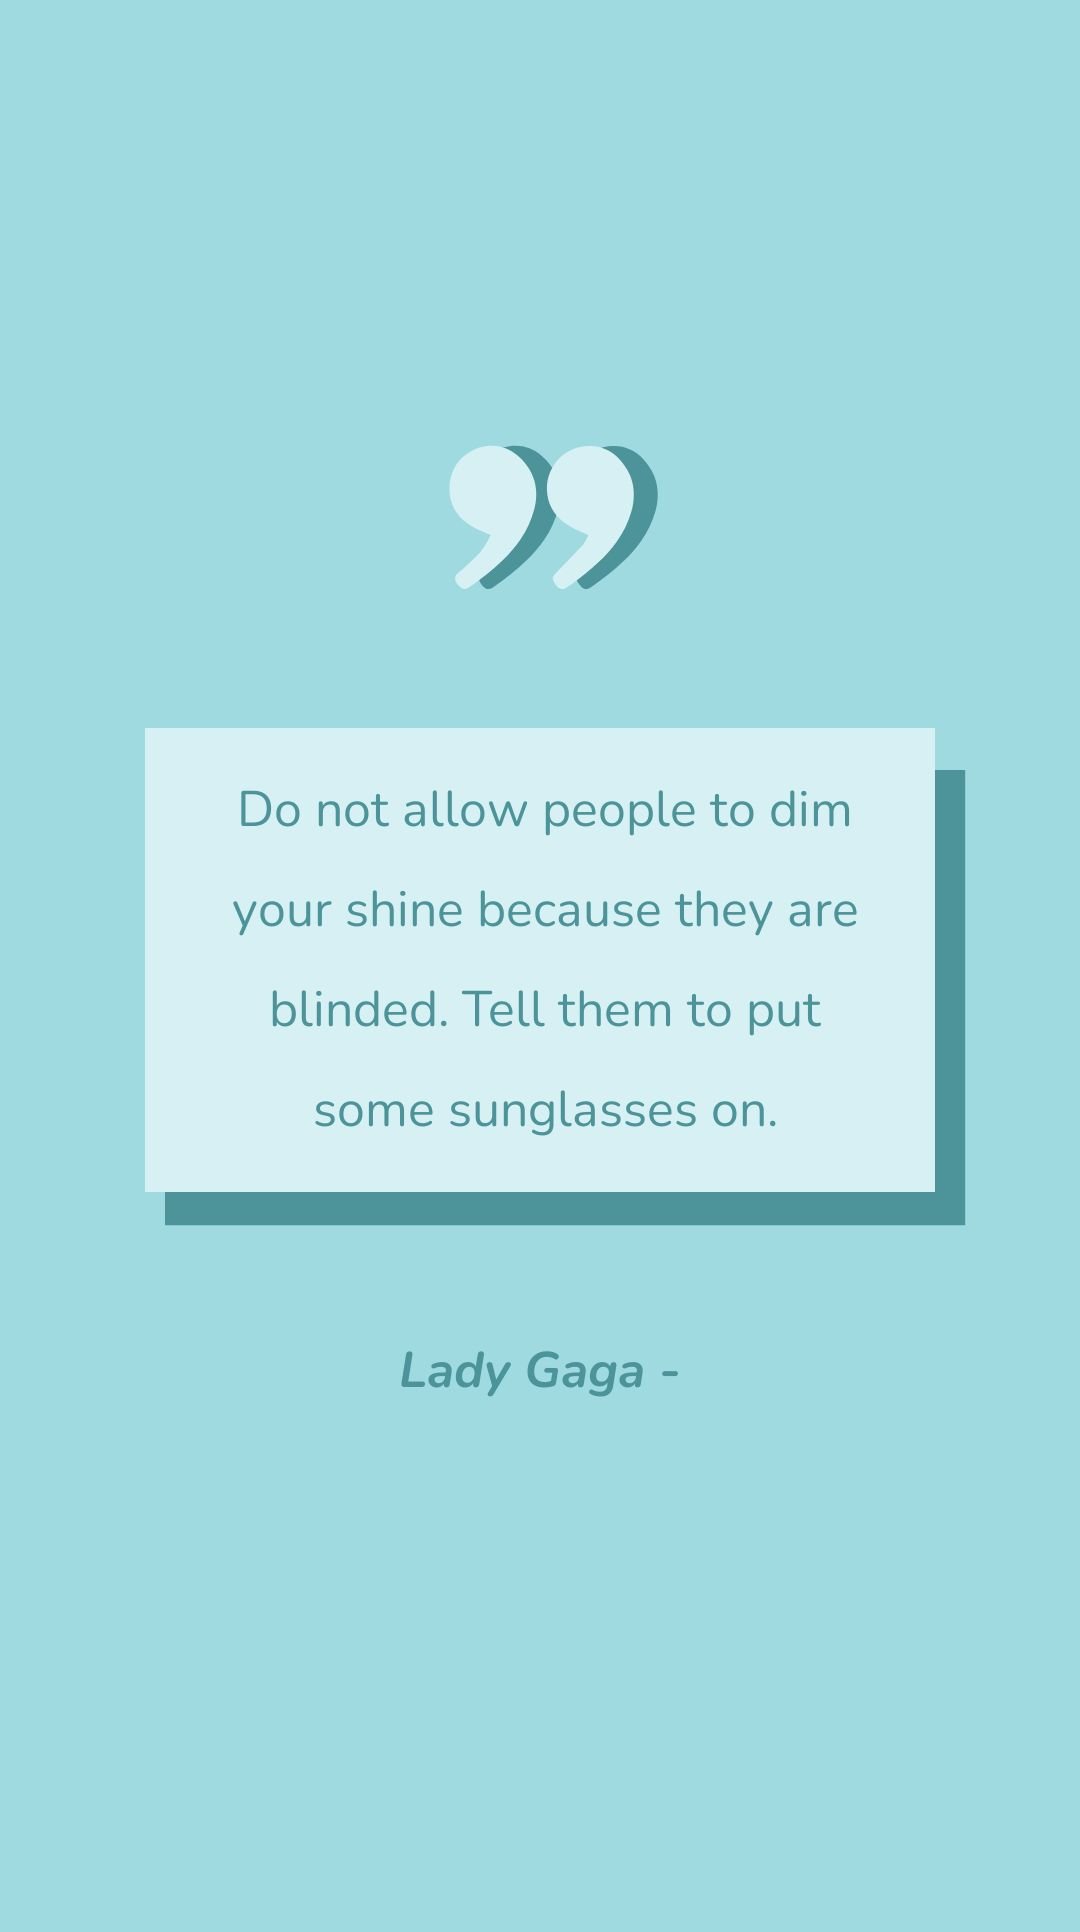 Lady Gaga - Do not allow people to dim your shine because they are blinded. Tell them to put some sunglasses on.